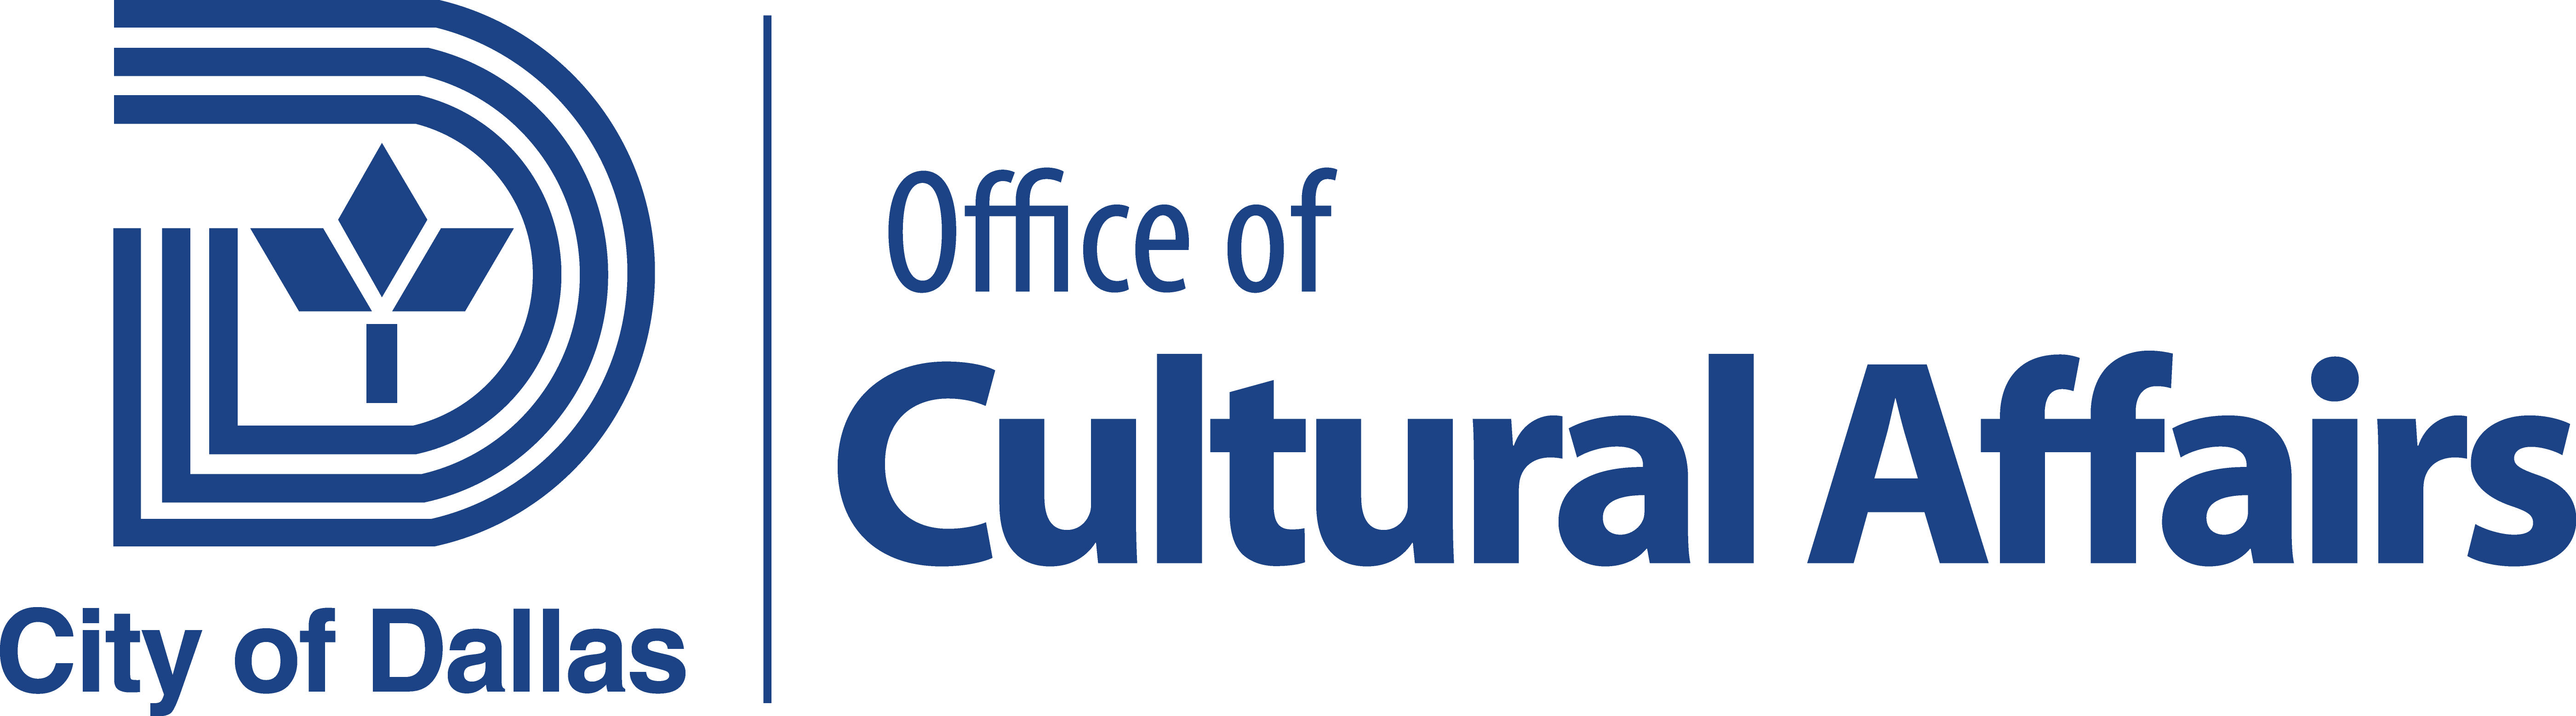 City of Dallas Office of Cultural Affairs